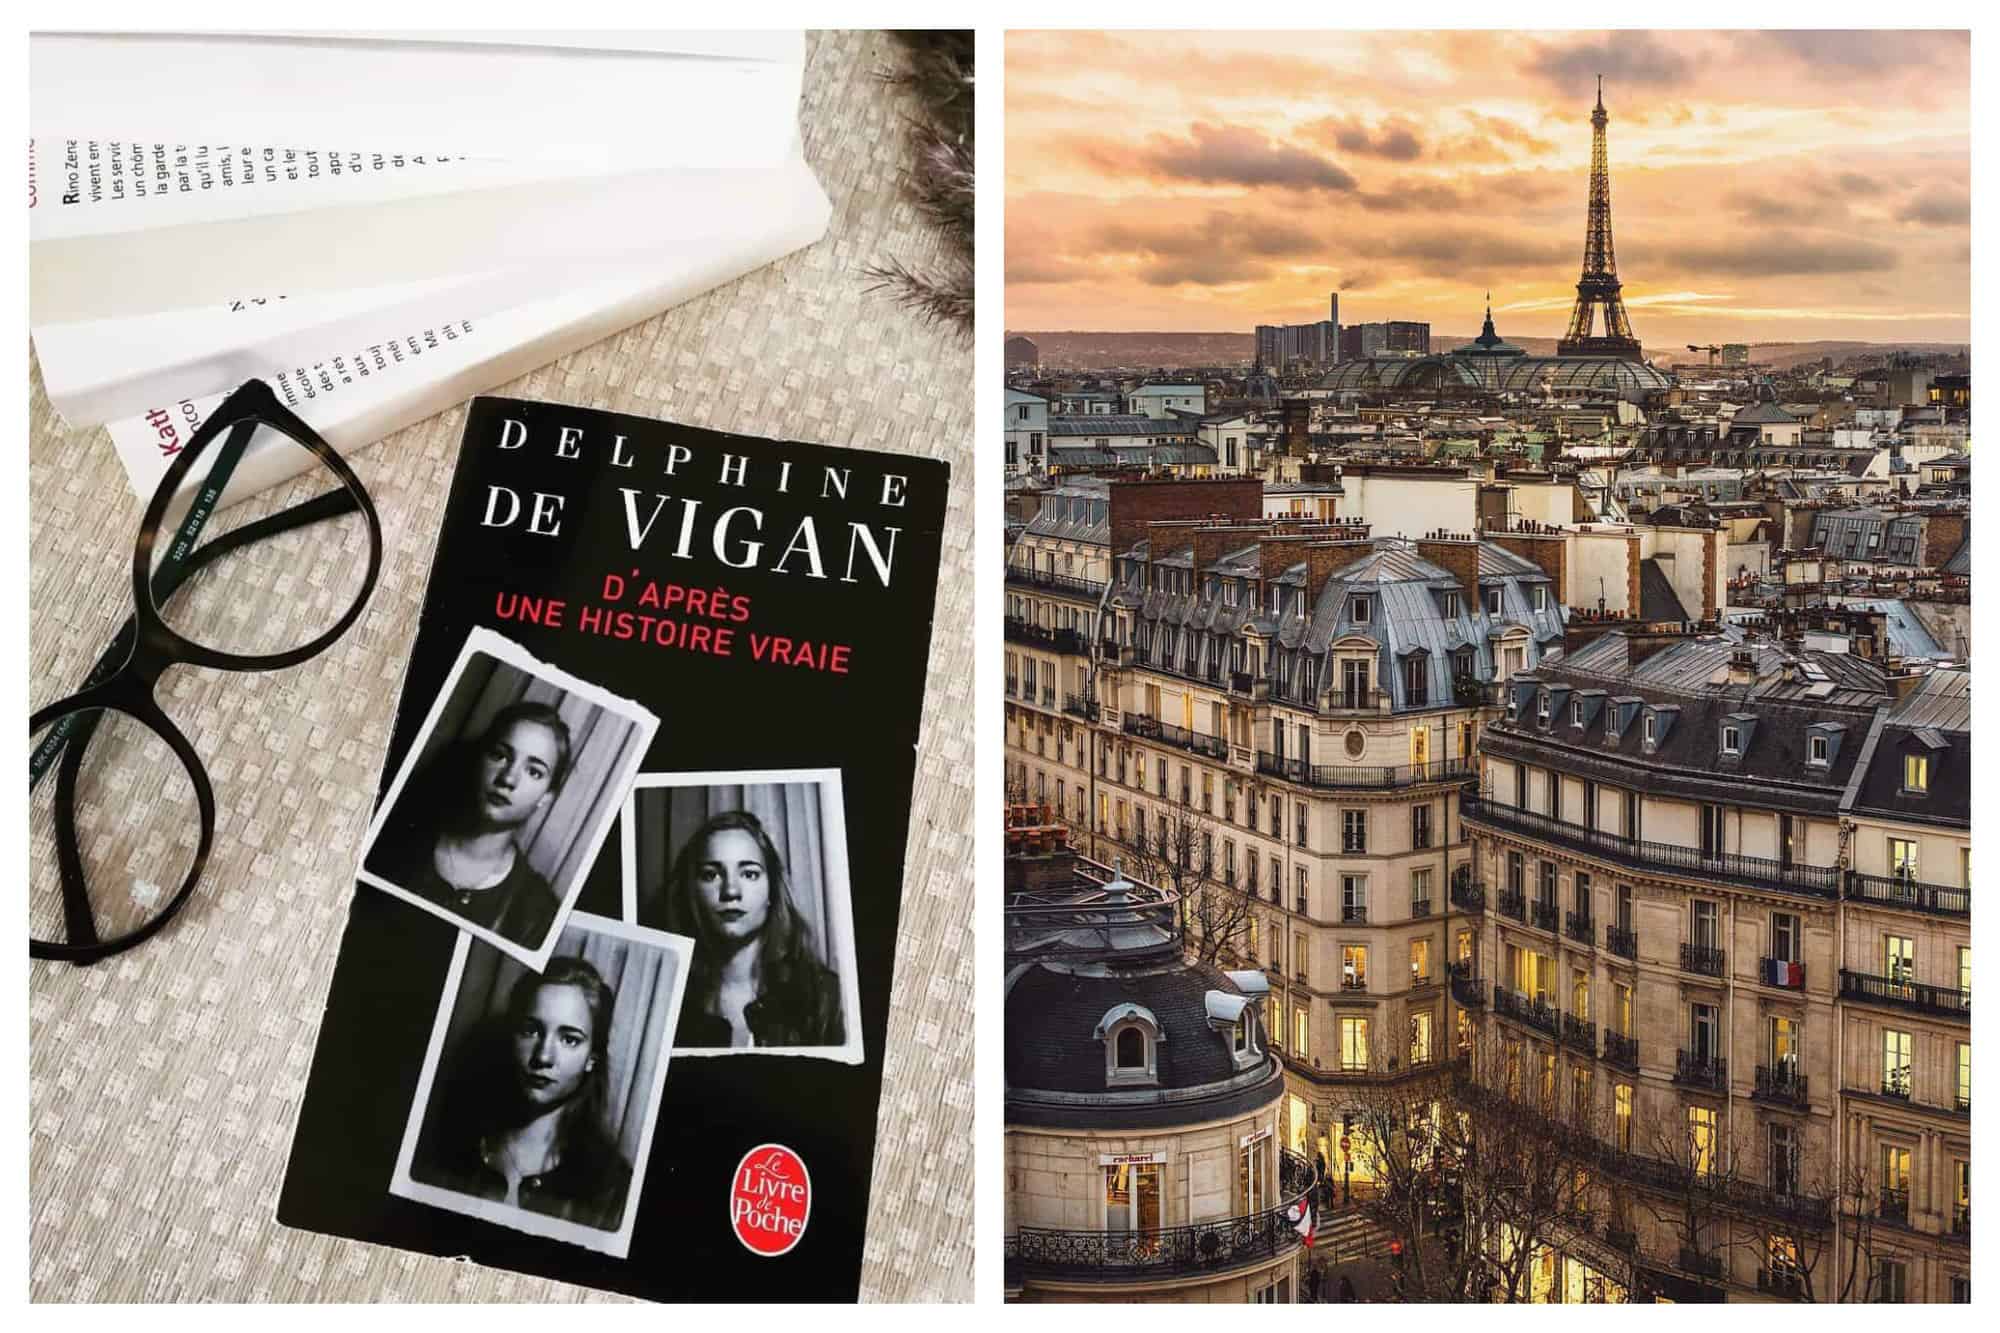 Left: A photo of the book "D'après une histoire vraie" by french author Delphine Vigan is posed on a surface beside a pair of glasses and 4 other unknown books that are stacked on top of one another. Right: A view of Haussmannian buildings, their rooftops and their details, can be seen with an orange sunset sky and the Eiffel Tower at a distance.